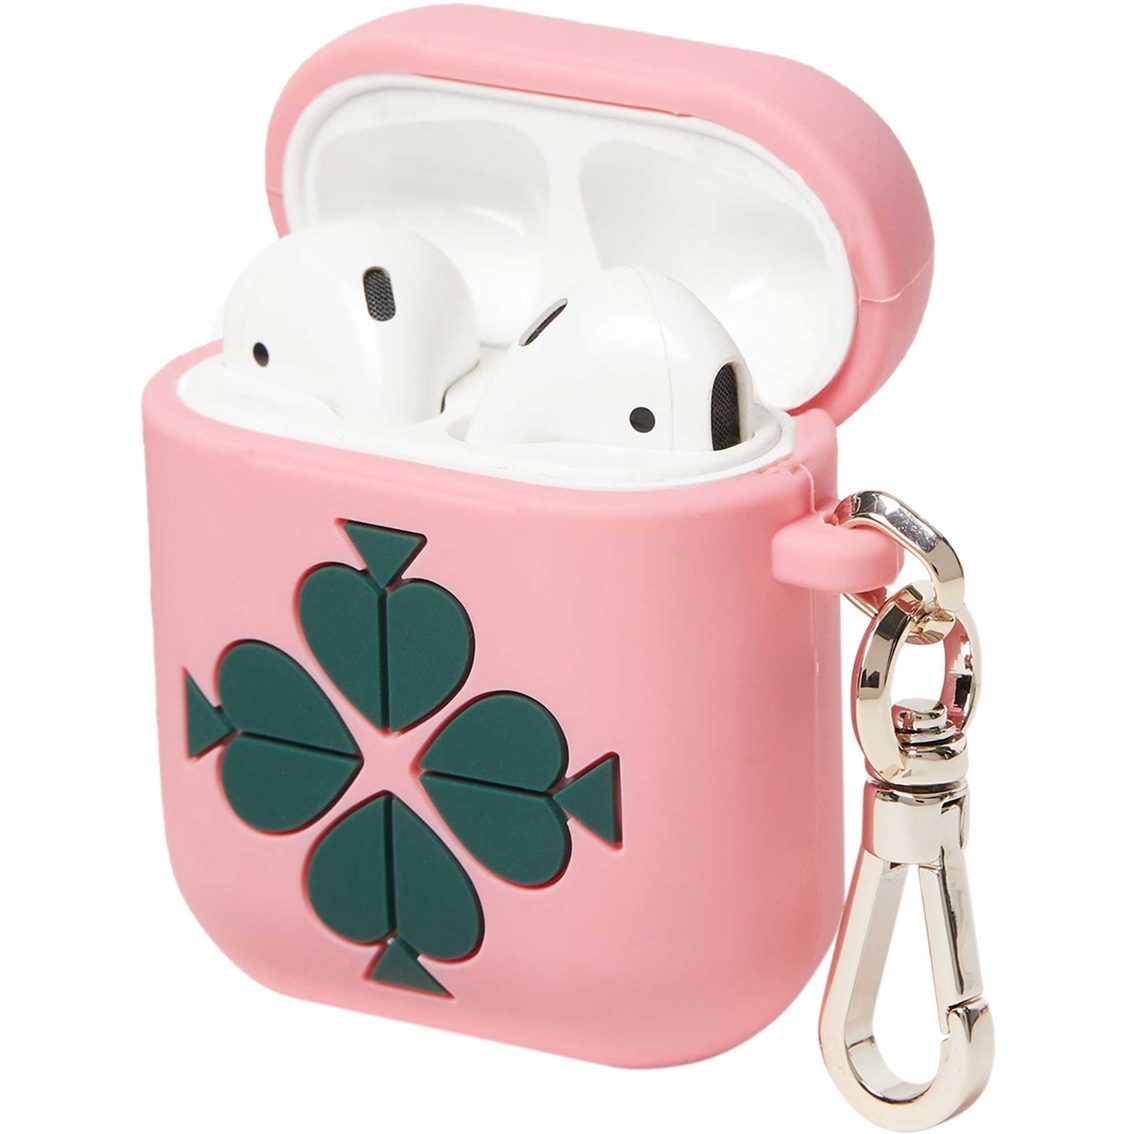 Kate Spade New York Airpod Case | Apple Accessories | Home Office